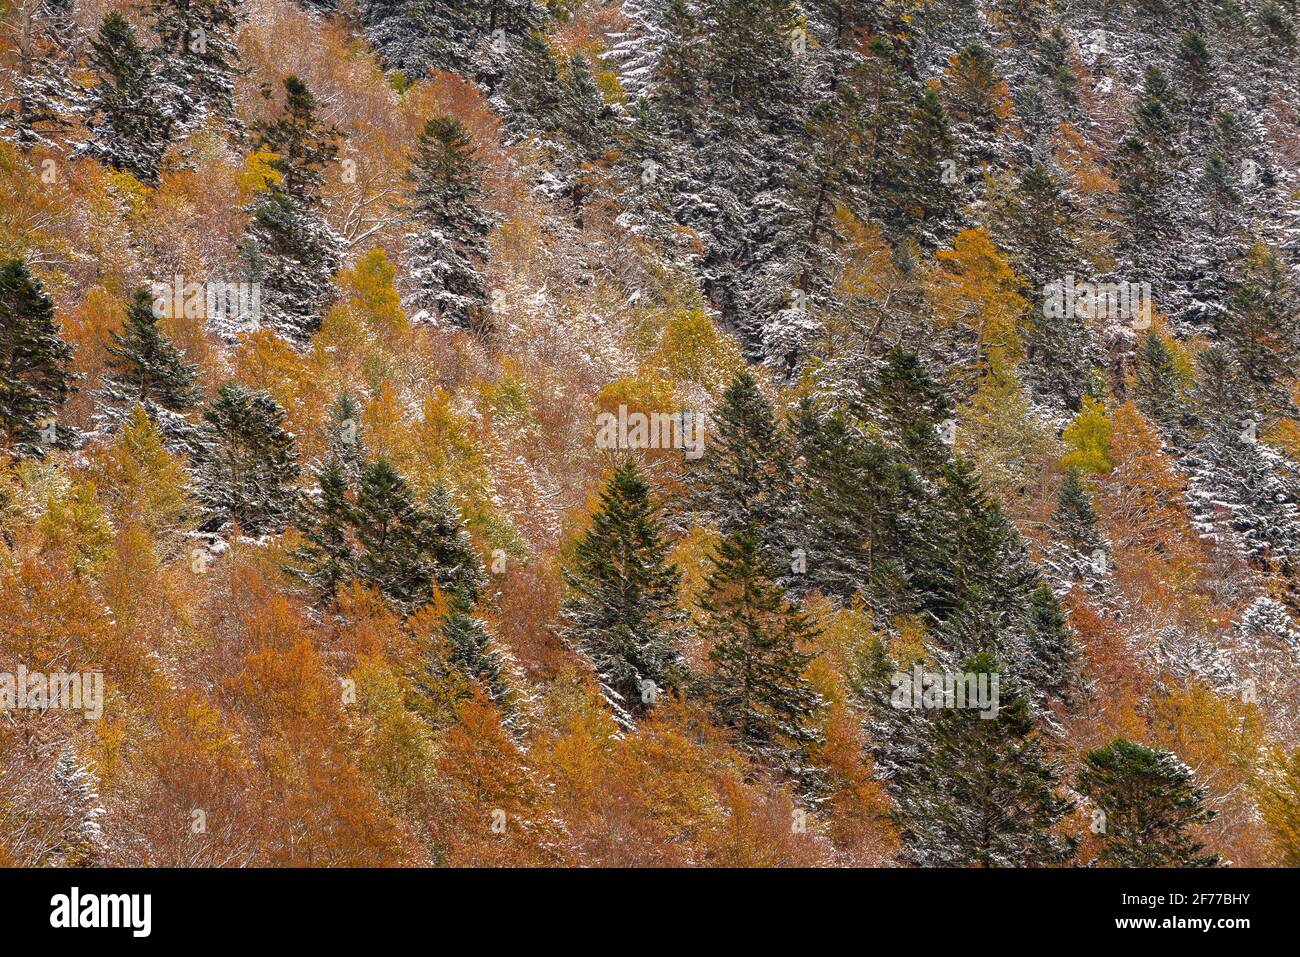 Autumn mixed forests and streams descending from the Besiberri valley to the Barrabés valley (Aran valley, Pyrenees, Catalonia, Spain) Stock Photo